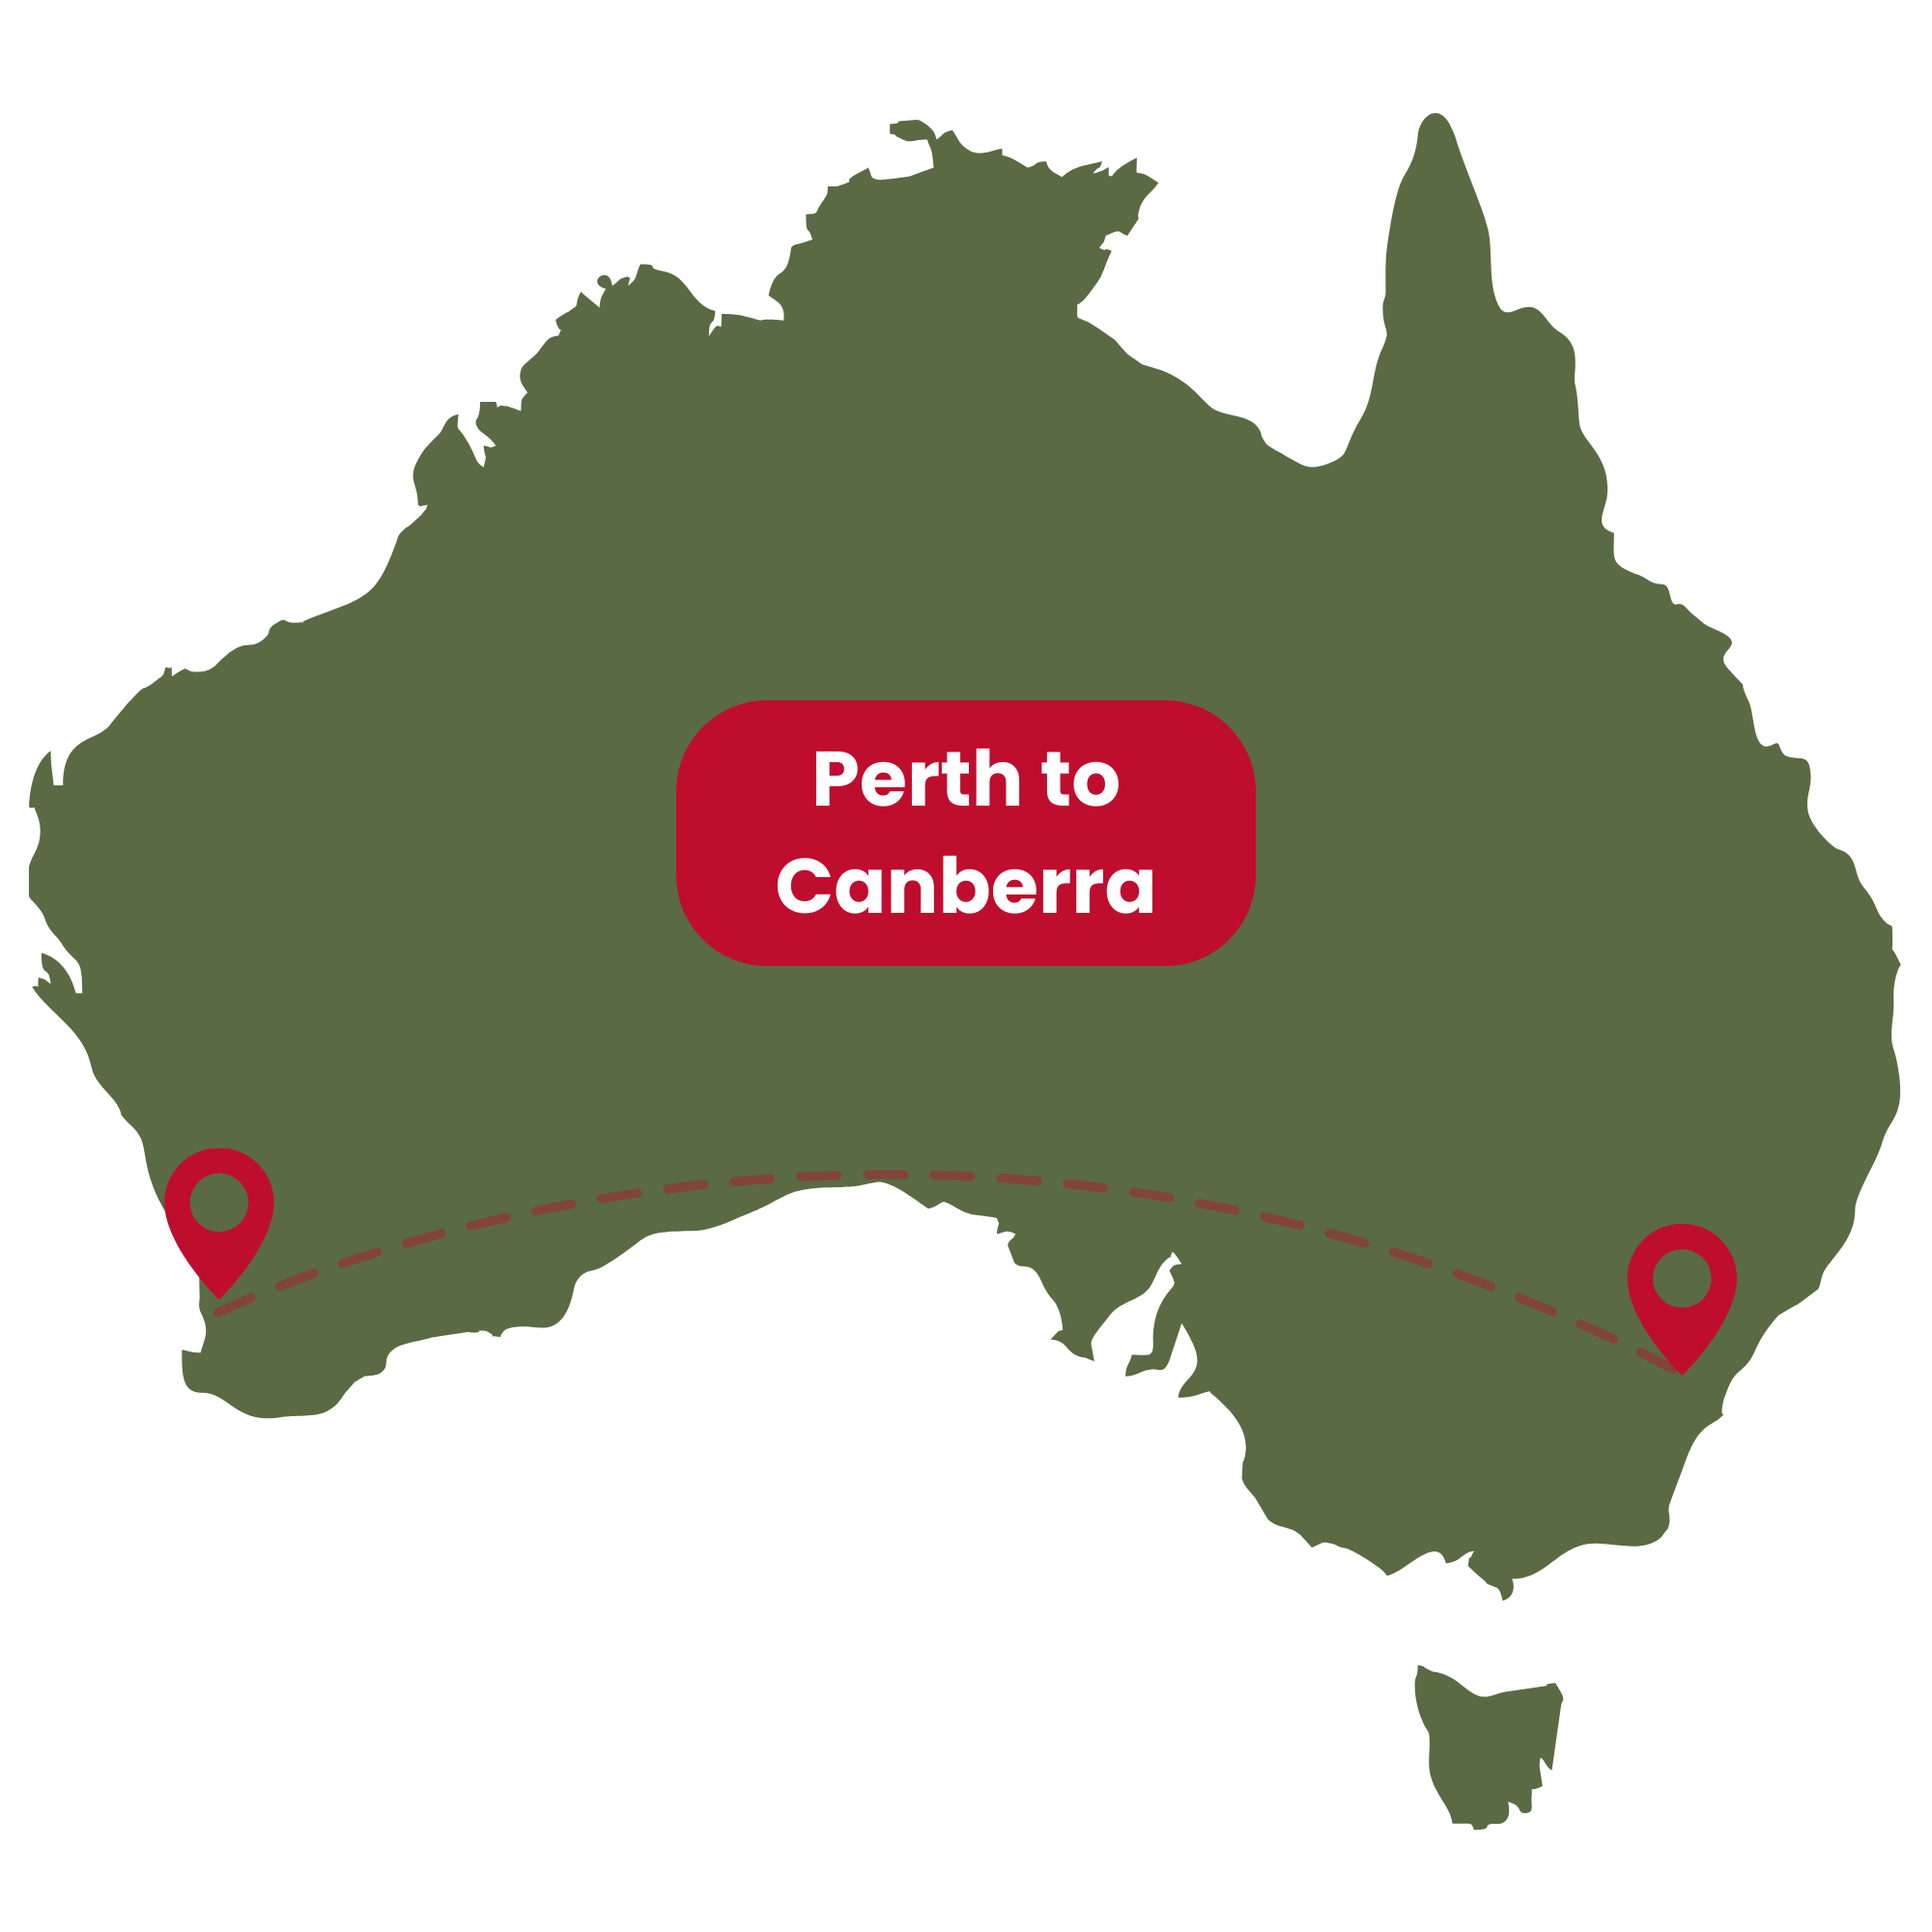 Perth to Canberra repatriation map.